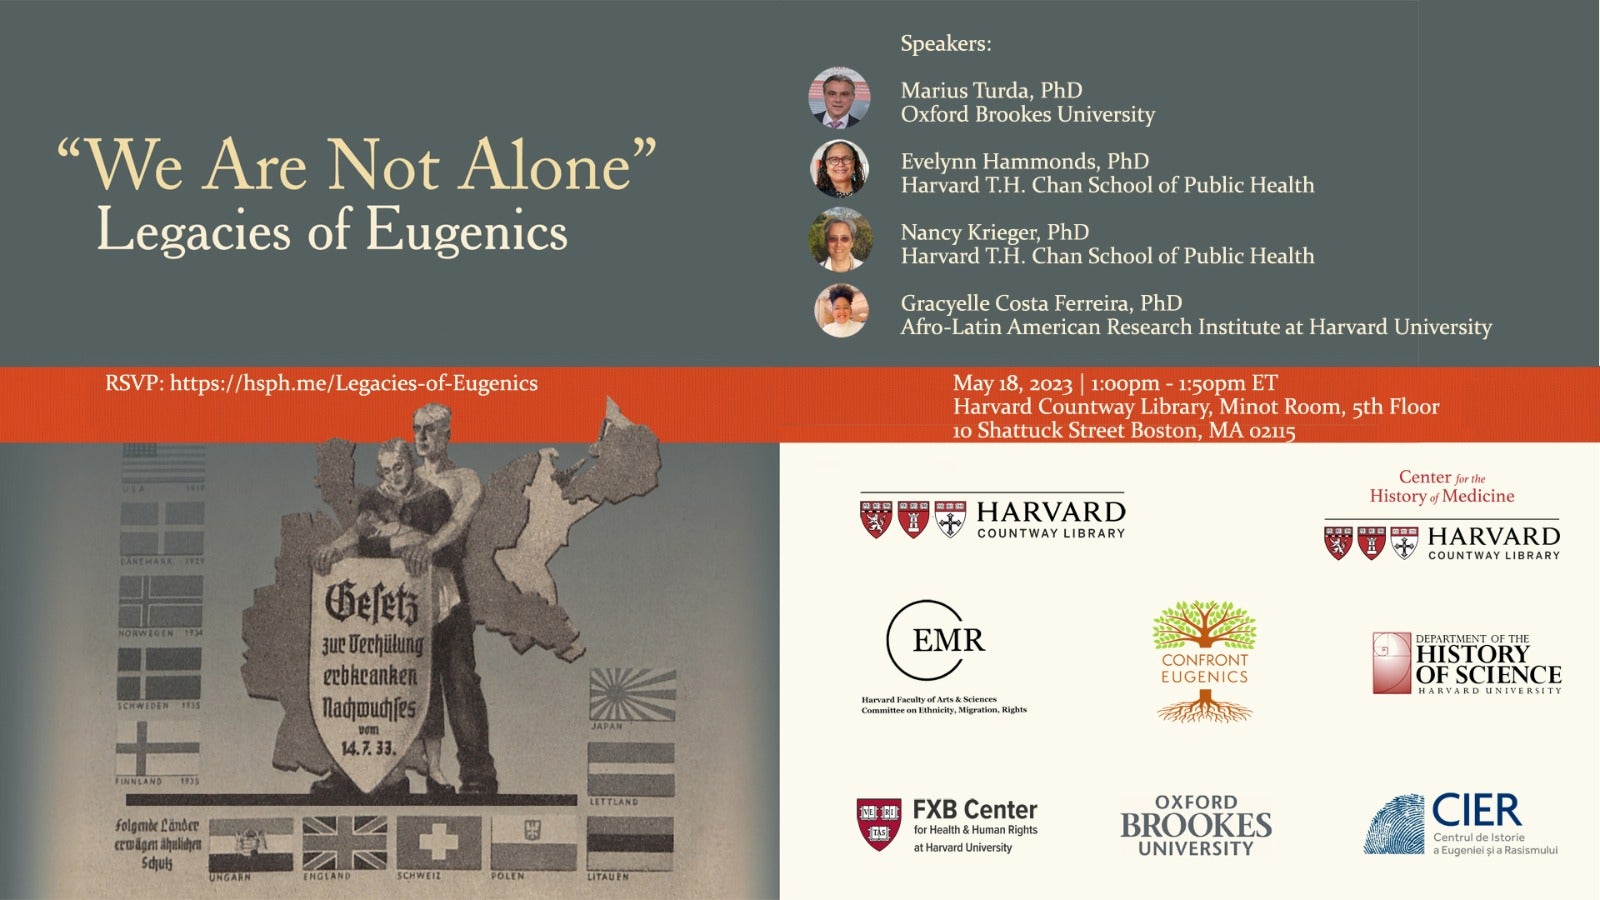 Flier for the opening of the exhibition "We Are Not Alone": Legacies of Eugenics at Harvard Countway Library on May 18, 2023.